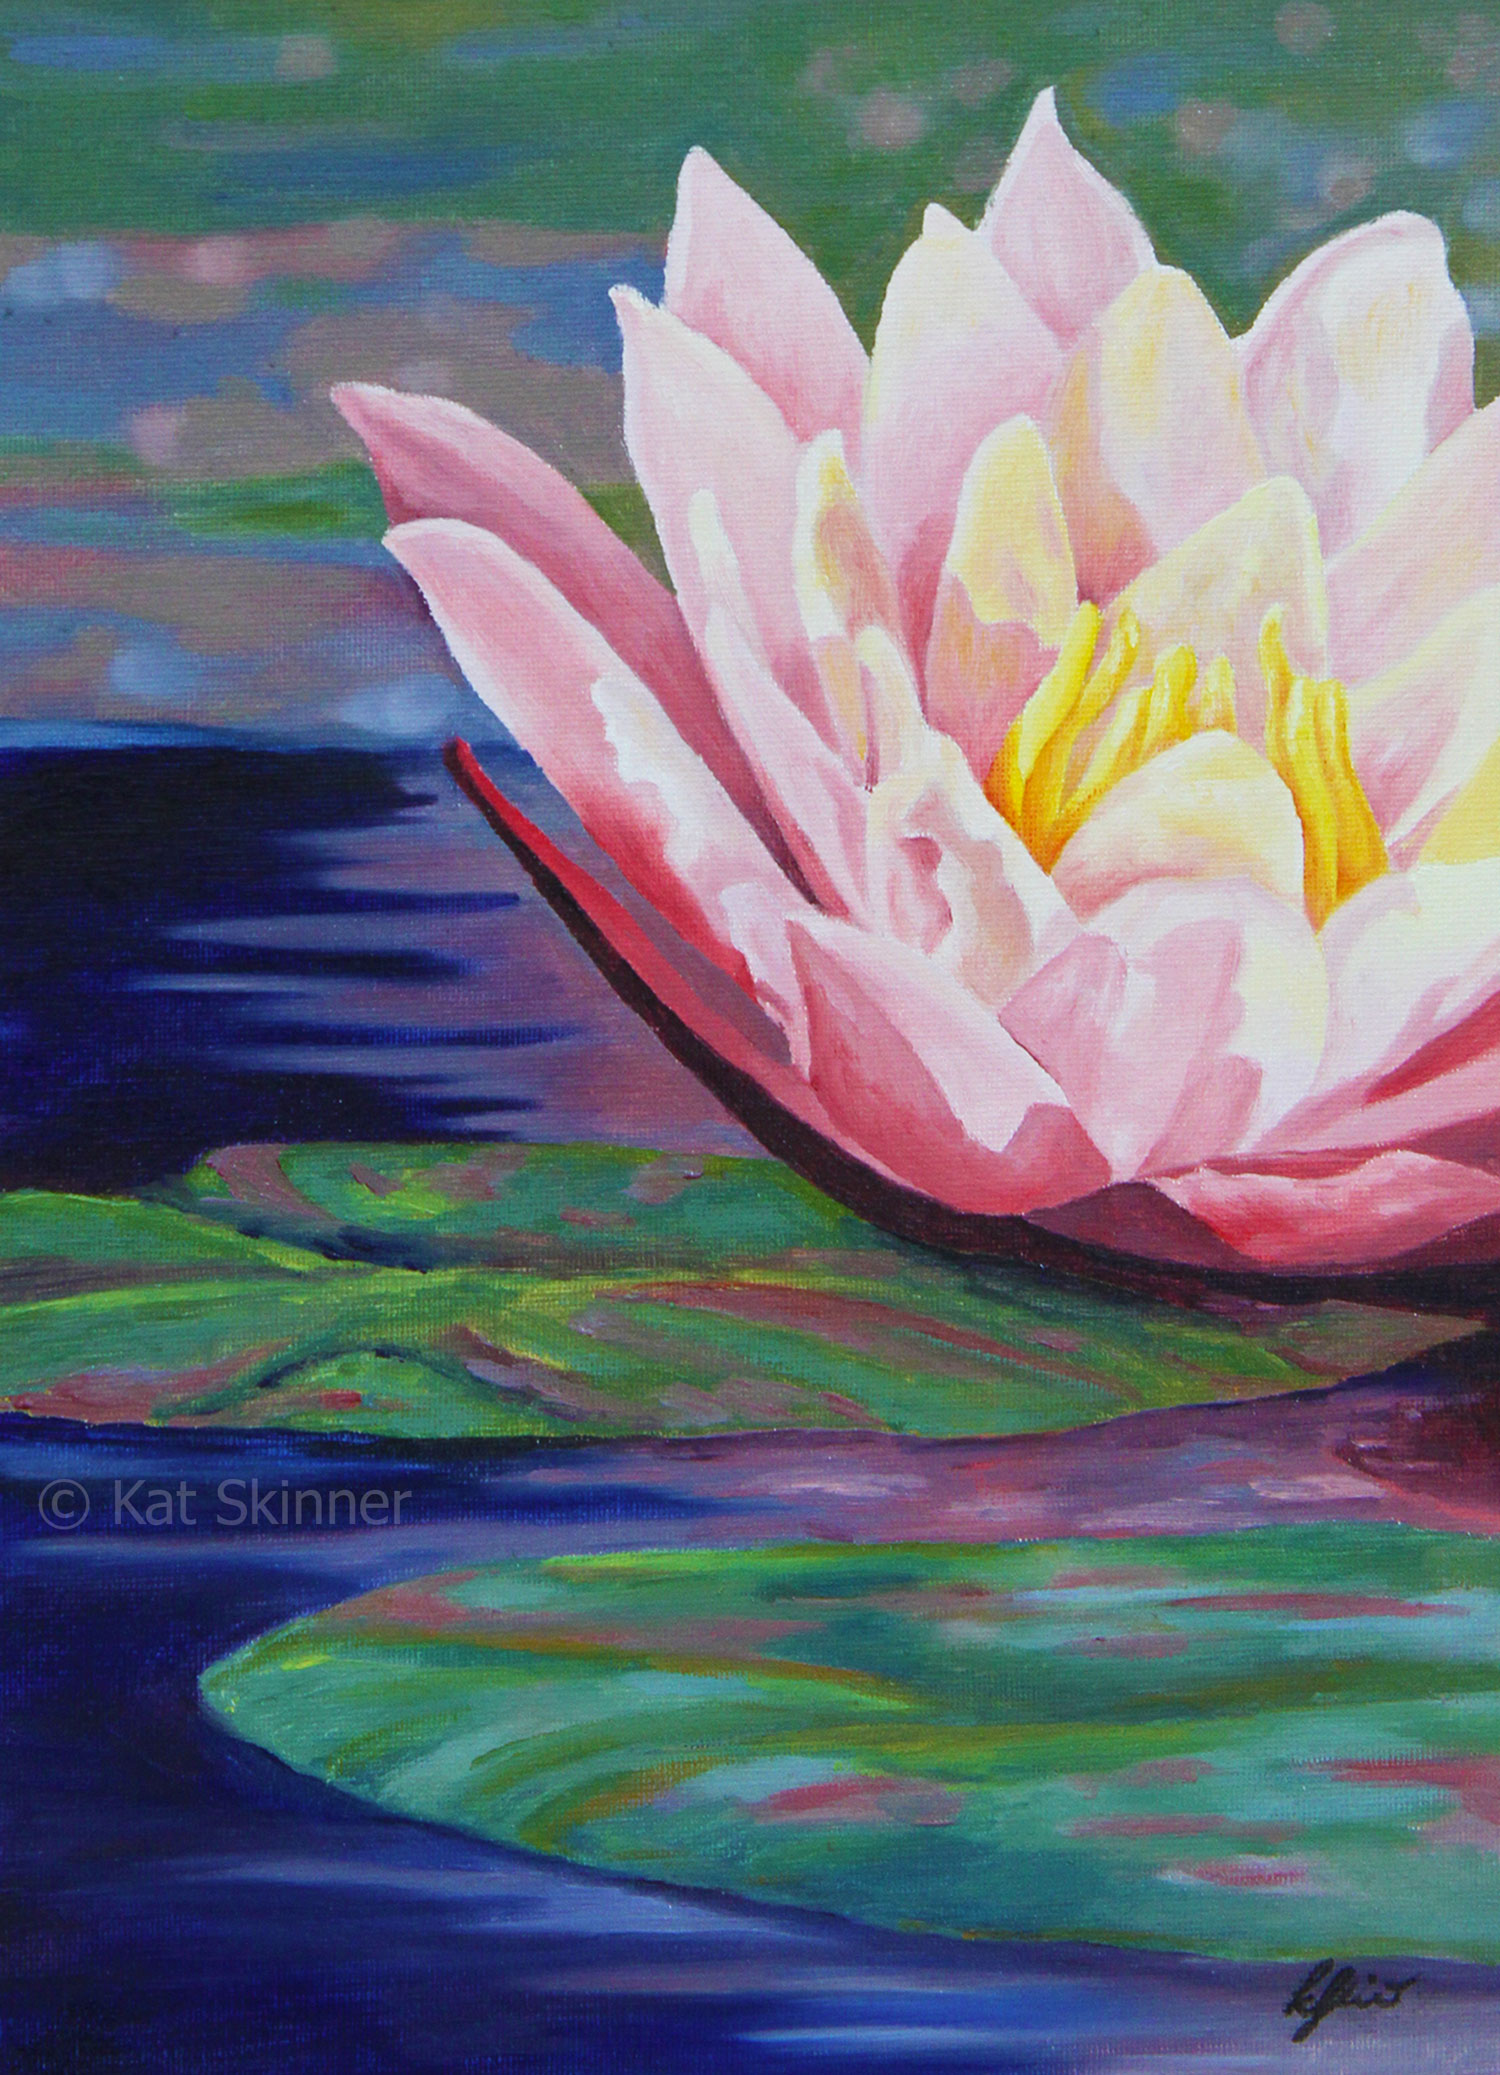 The Water Lily – Kat Skinner